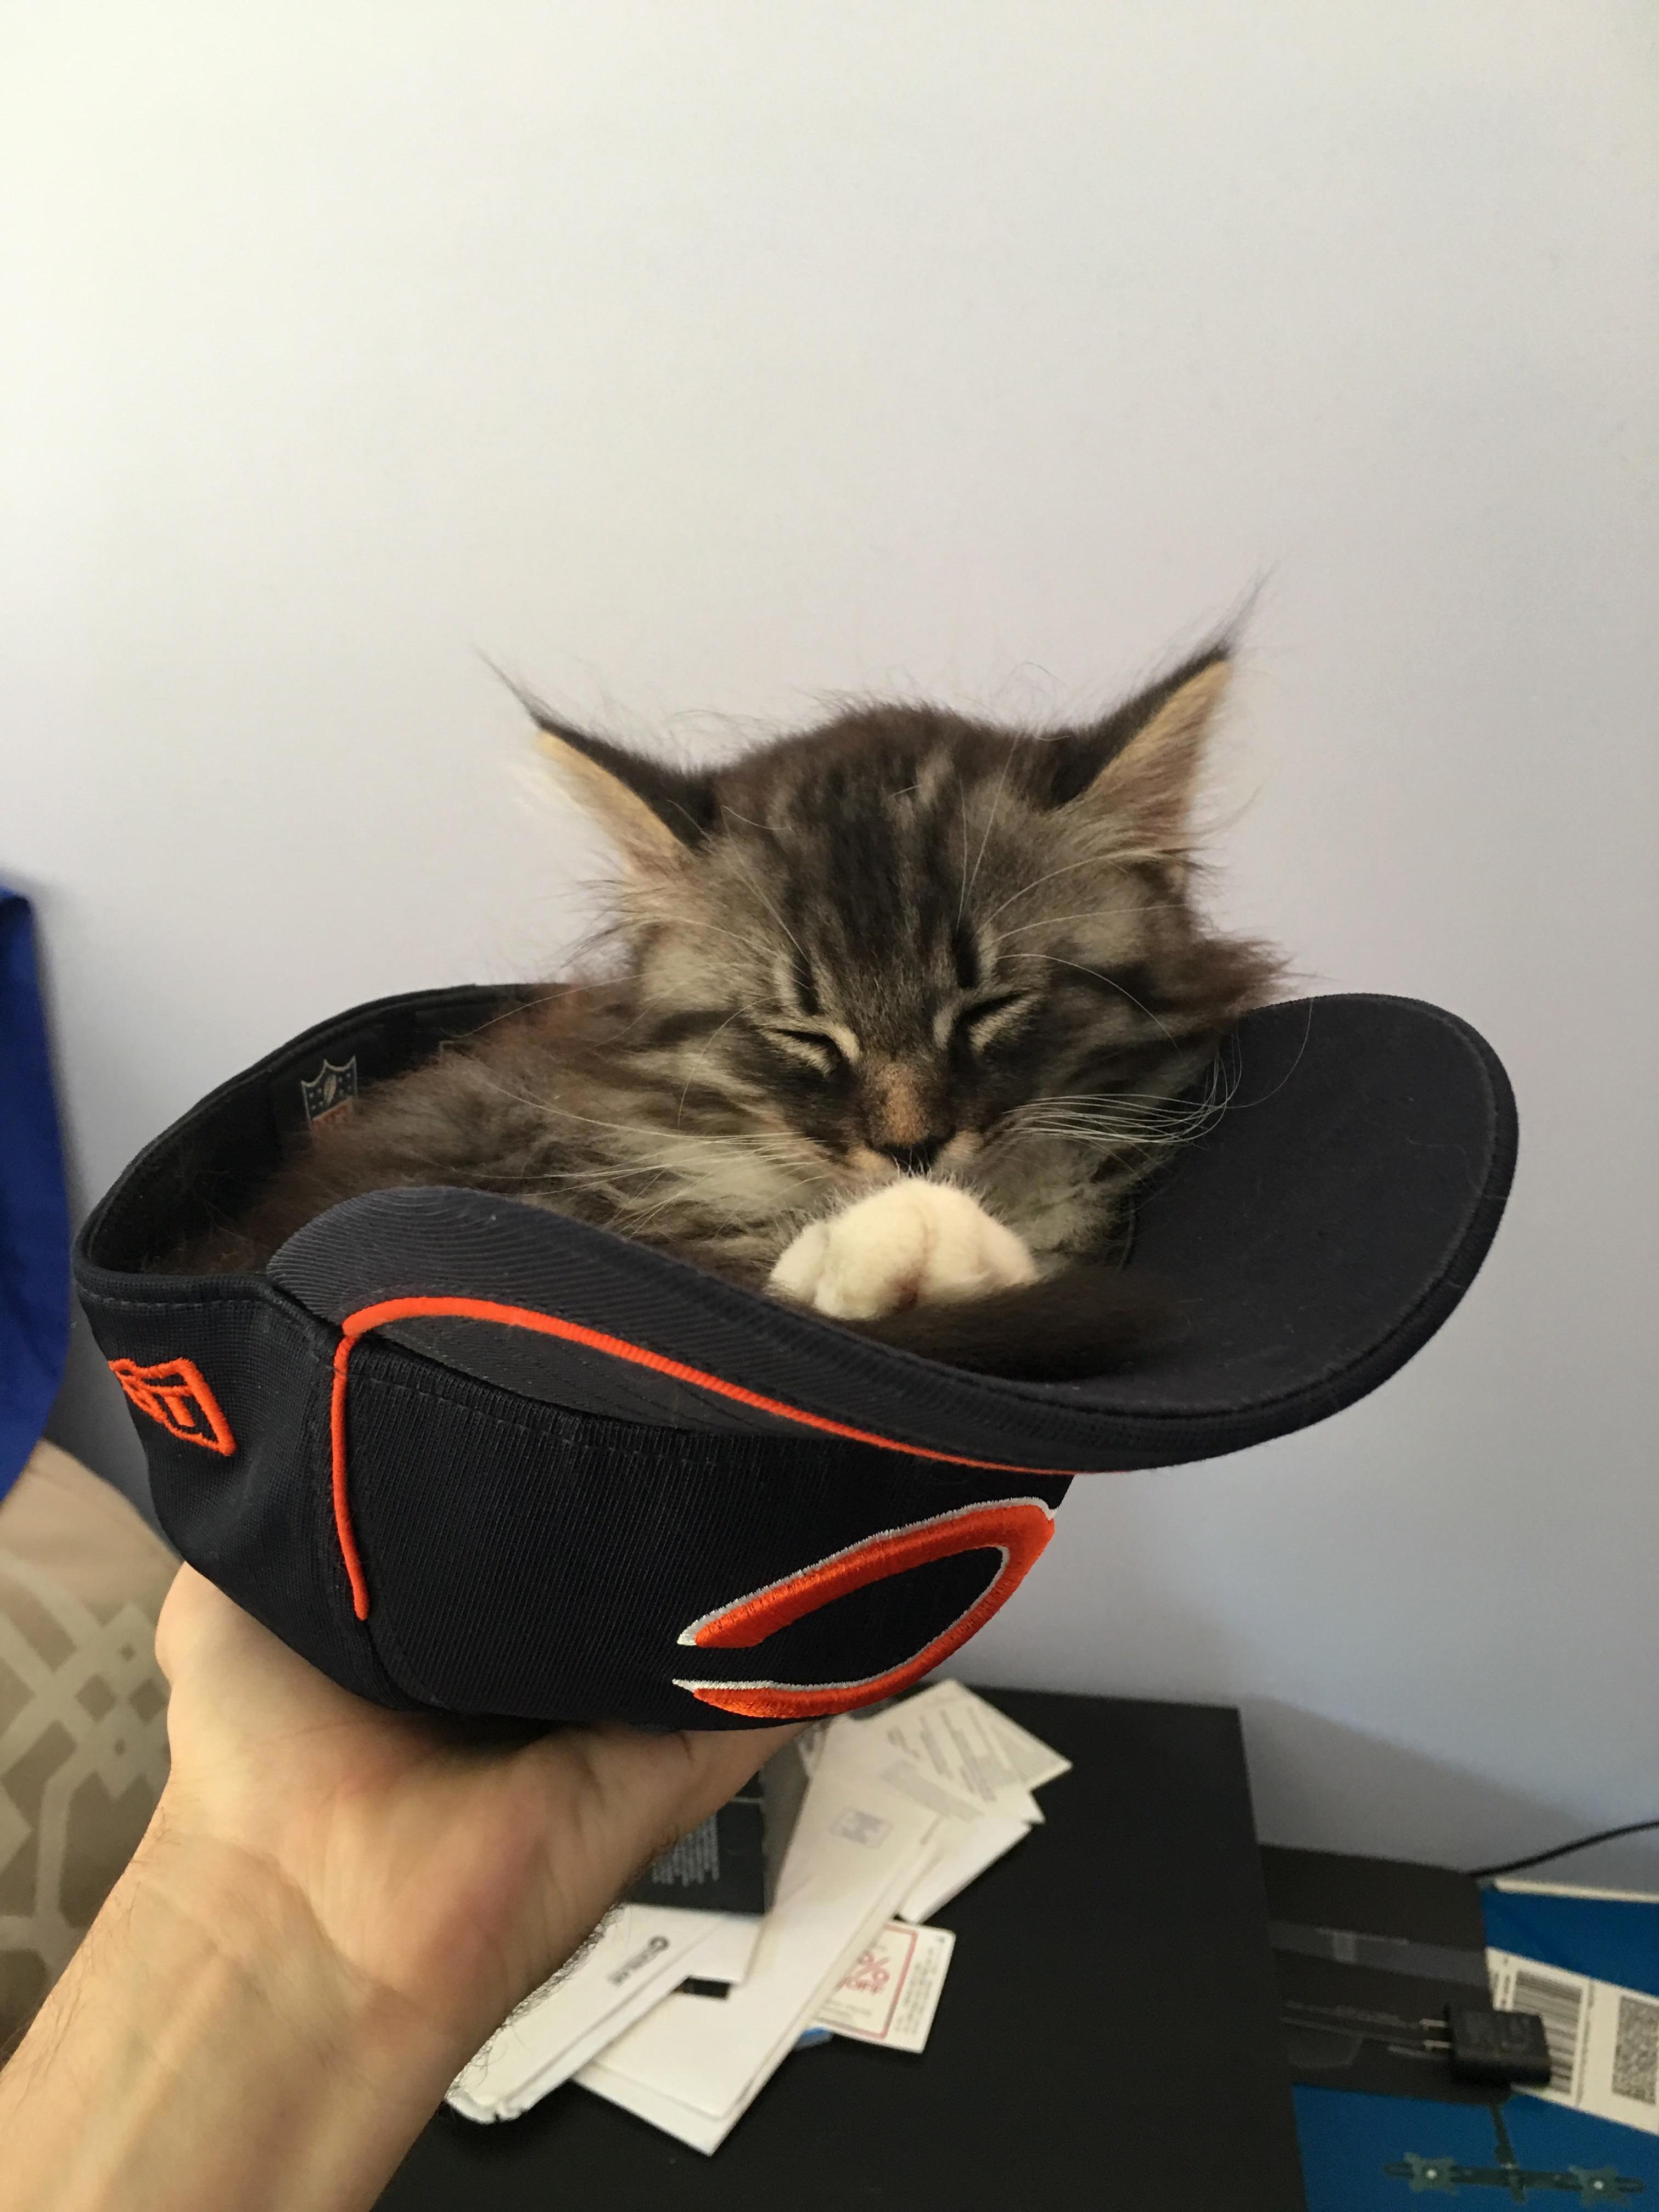 The cat in the chicago bears hat.